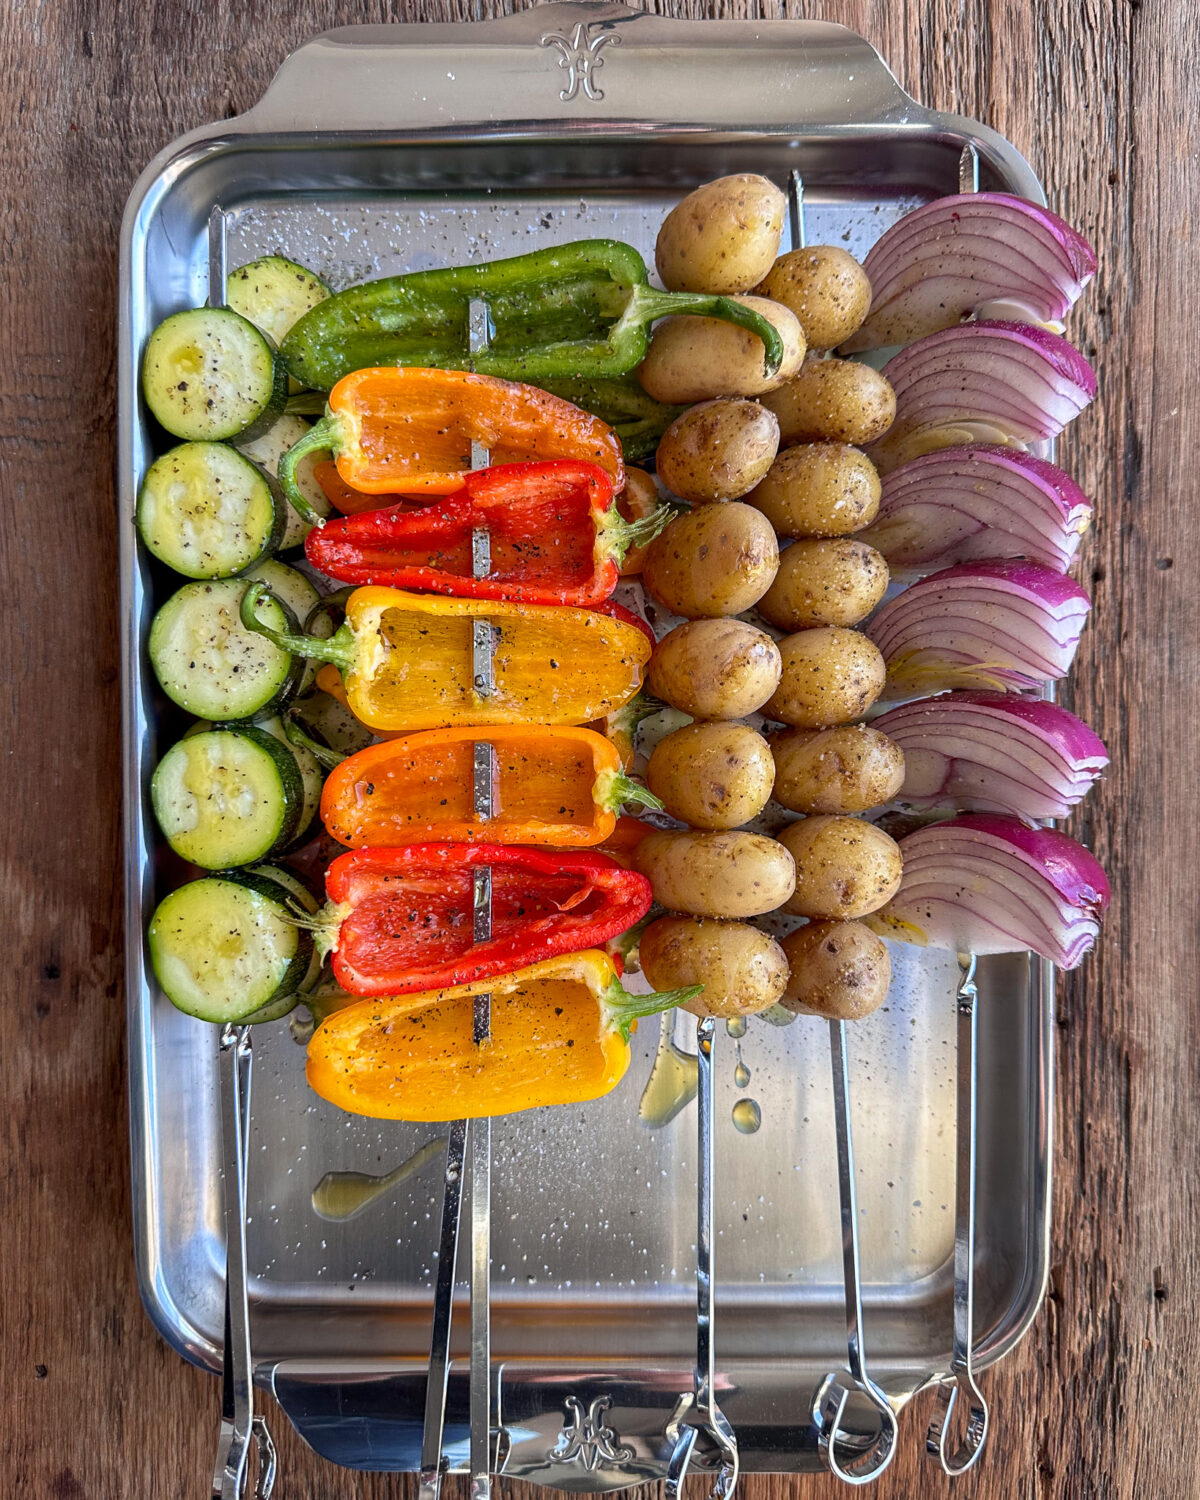 Thread each vegetable onto separate skewers and drizzle with olive oil and season with salt and pepper.